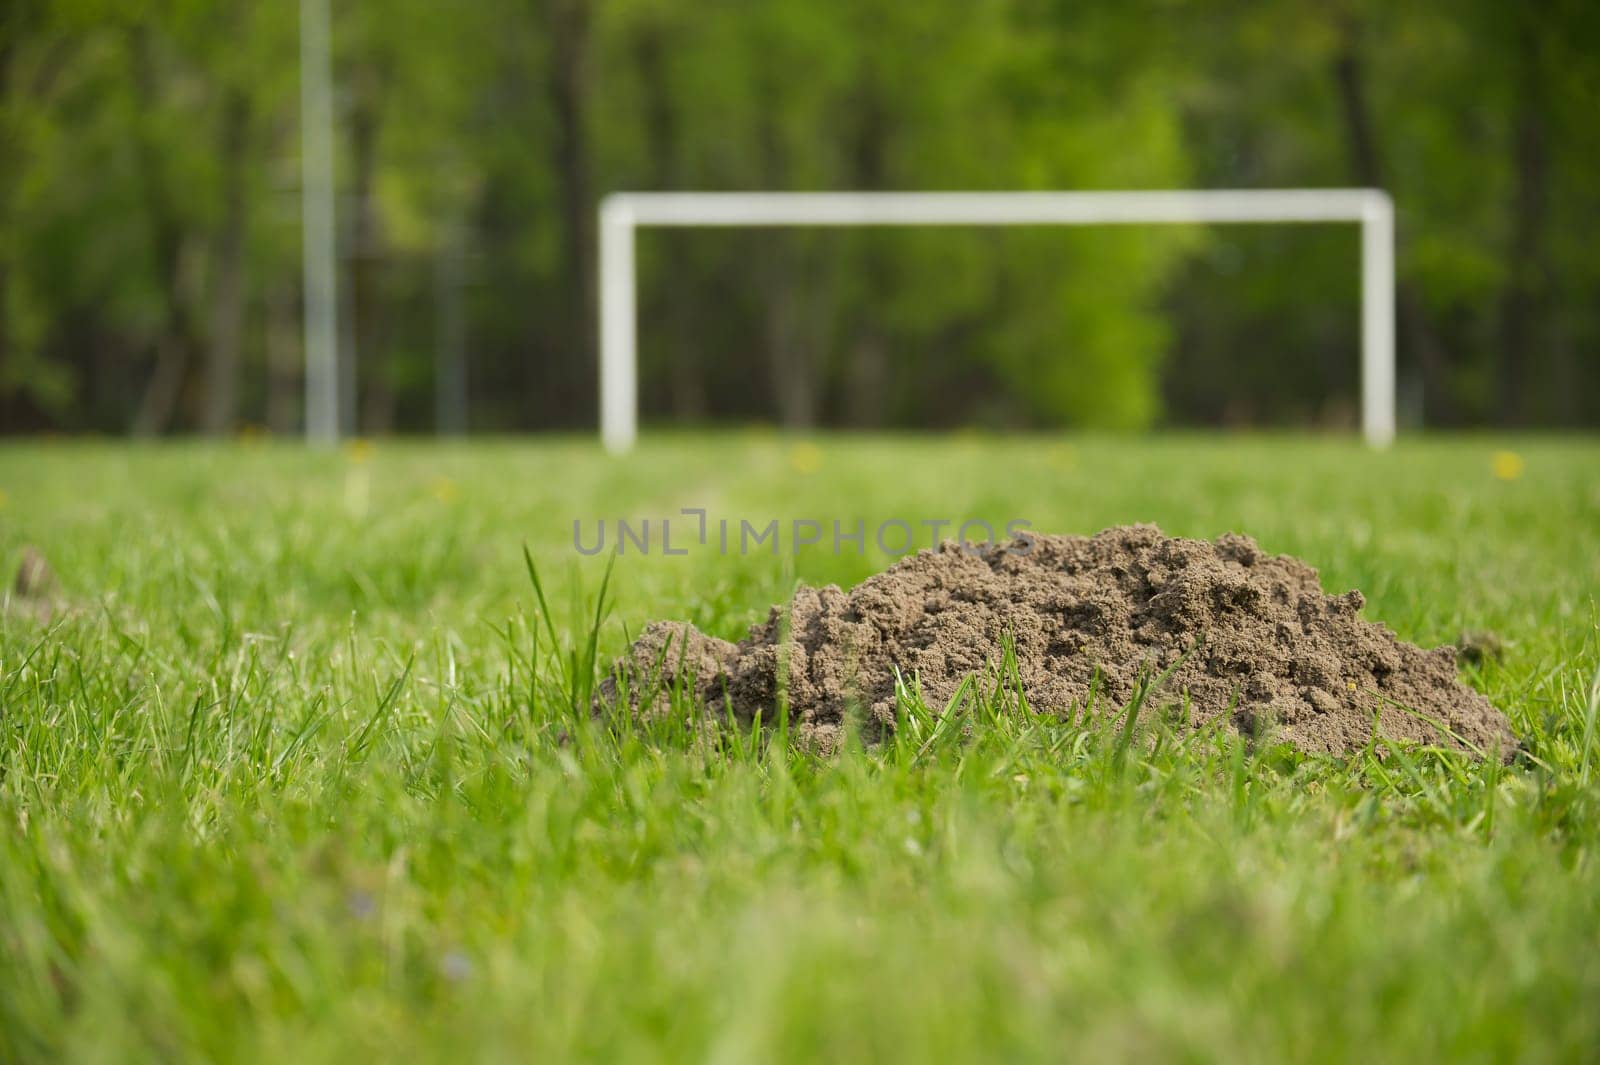 Soccer field with a goalpost in the background and a large mole hole situated in the foreground